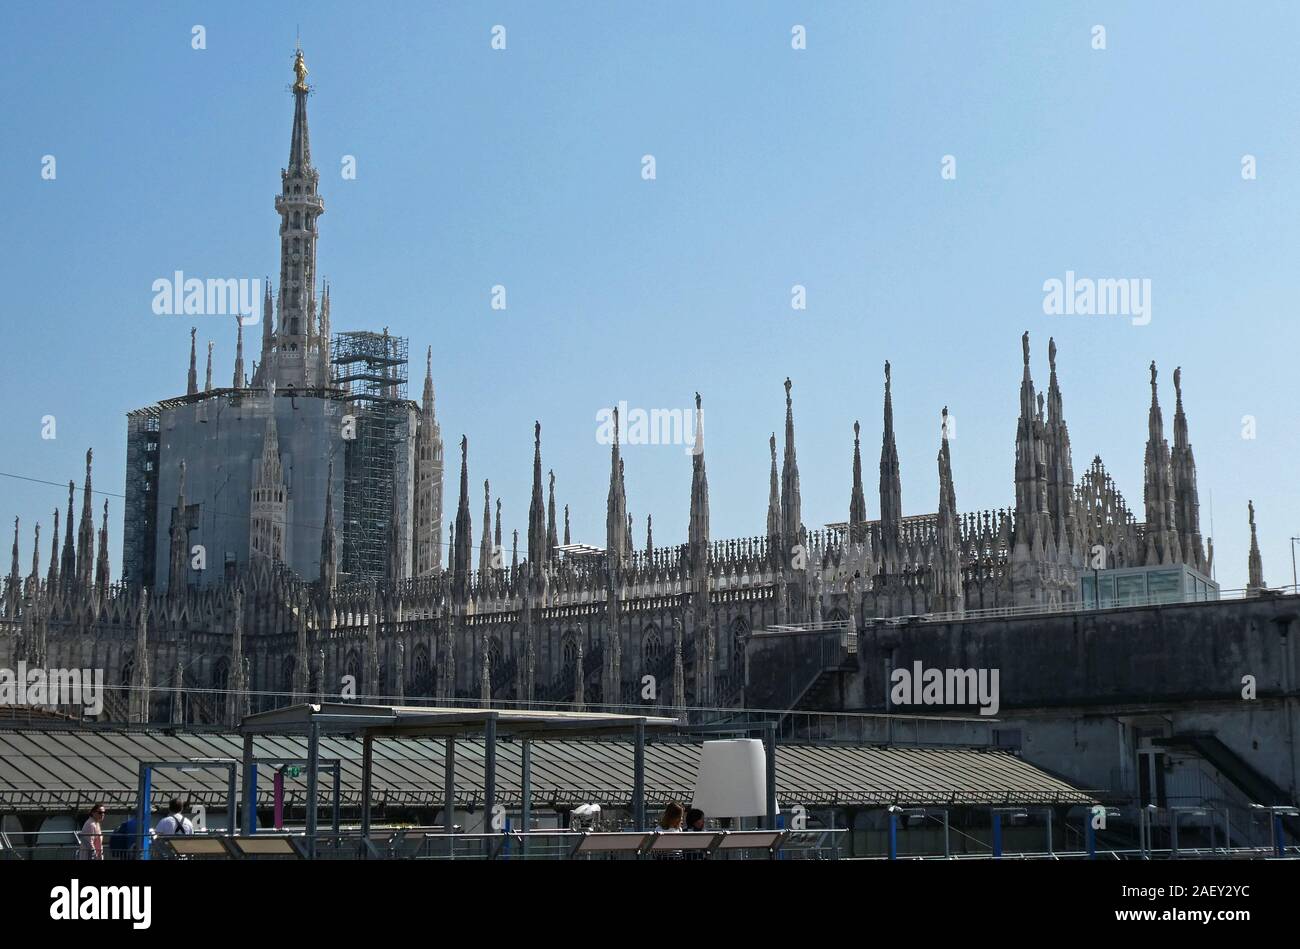 Milan cathedral seen from the roof of the Galleria Vittorio Emanuele II, Milan, Lombardy province, Italy, Europe Stock Photo